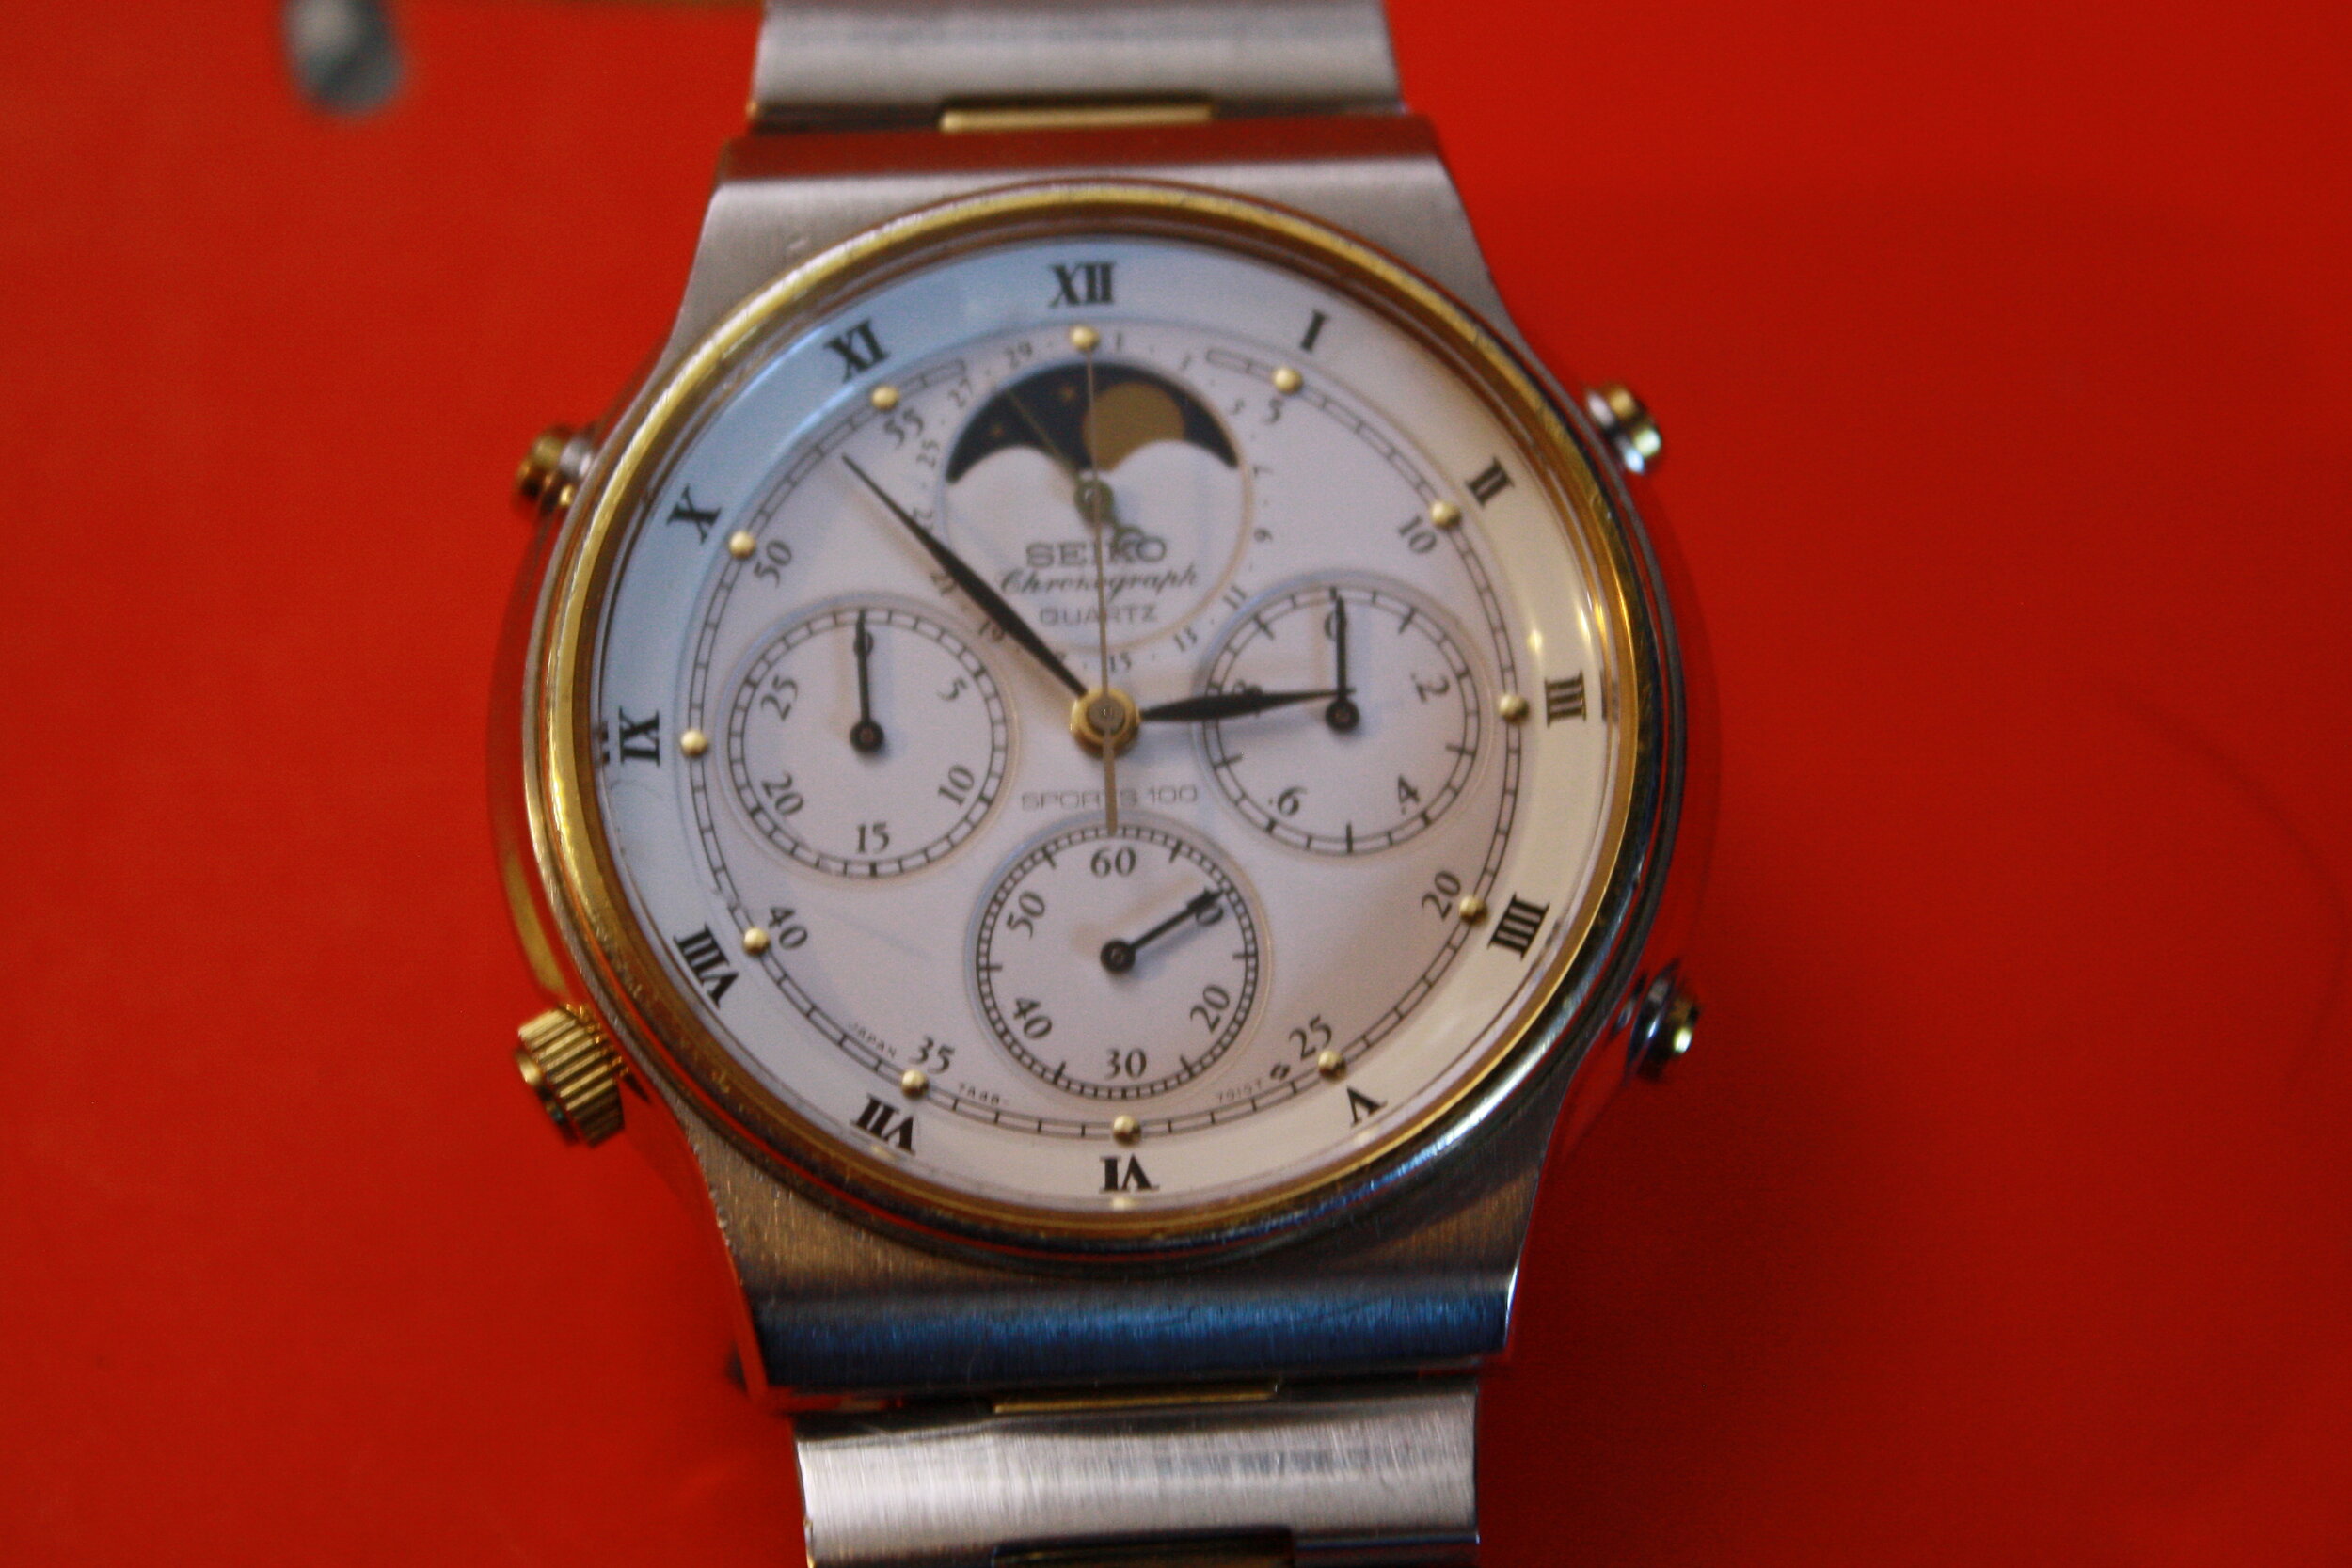 Seiko 7A48-7009 Moonphase Chronograph, All Original, Fully serviced, June  '85 — Klein Vintage Watch